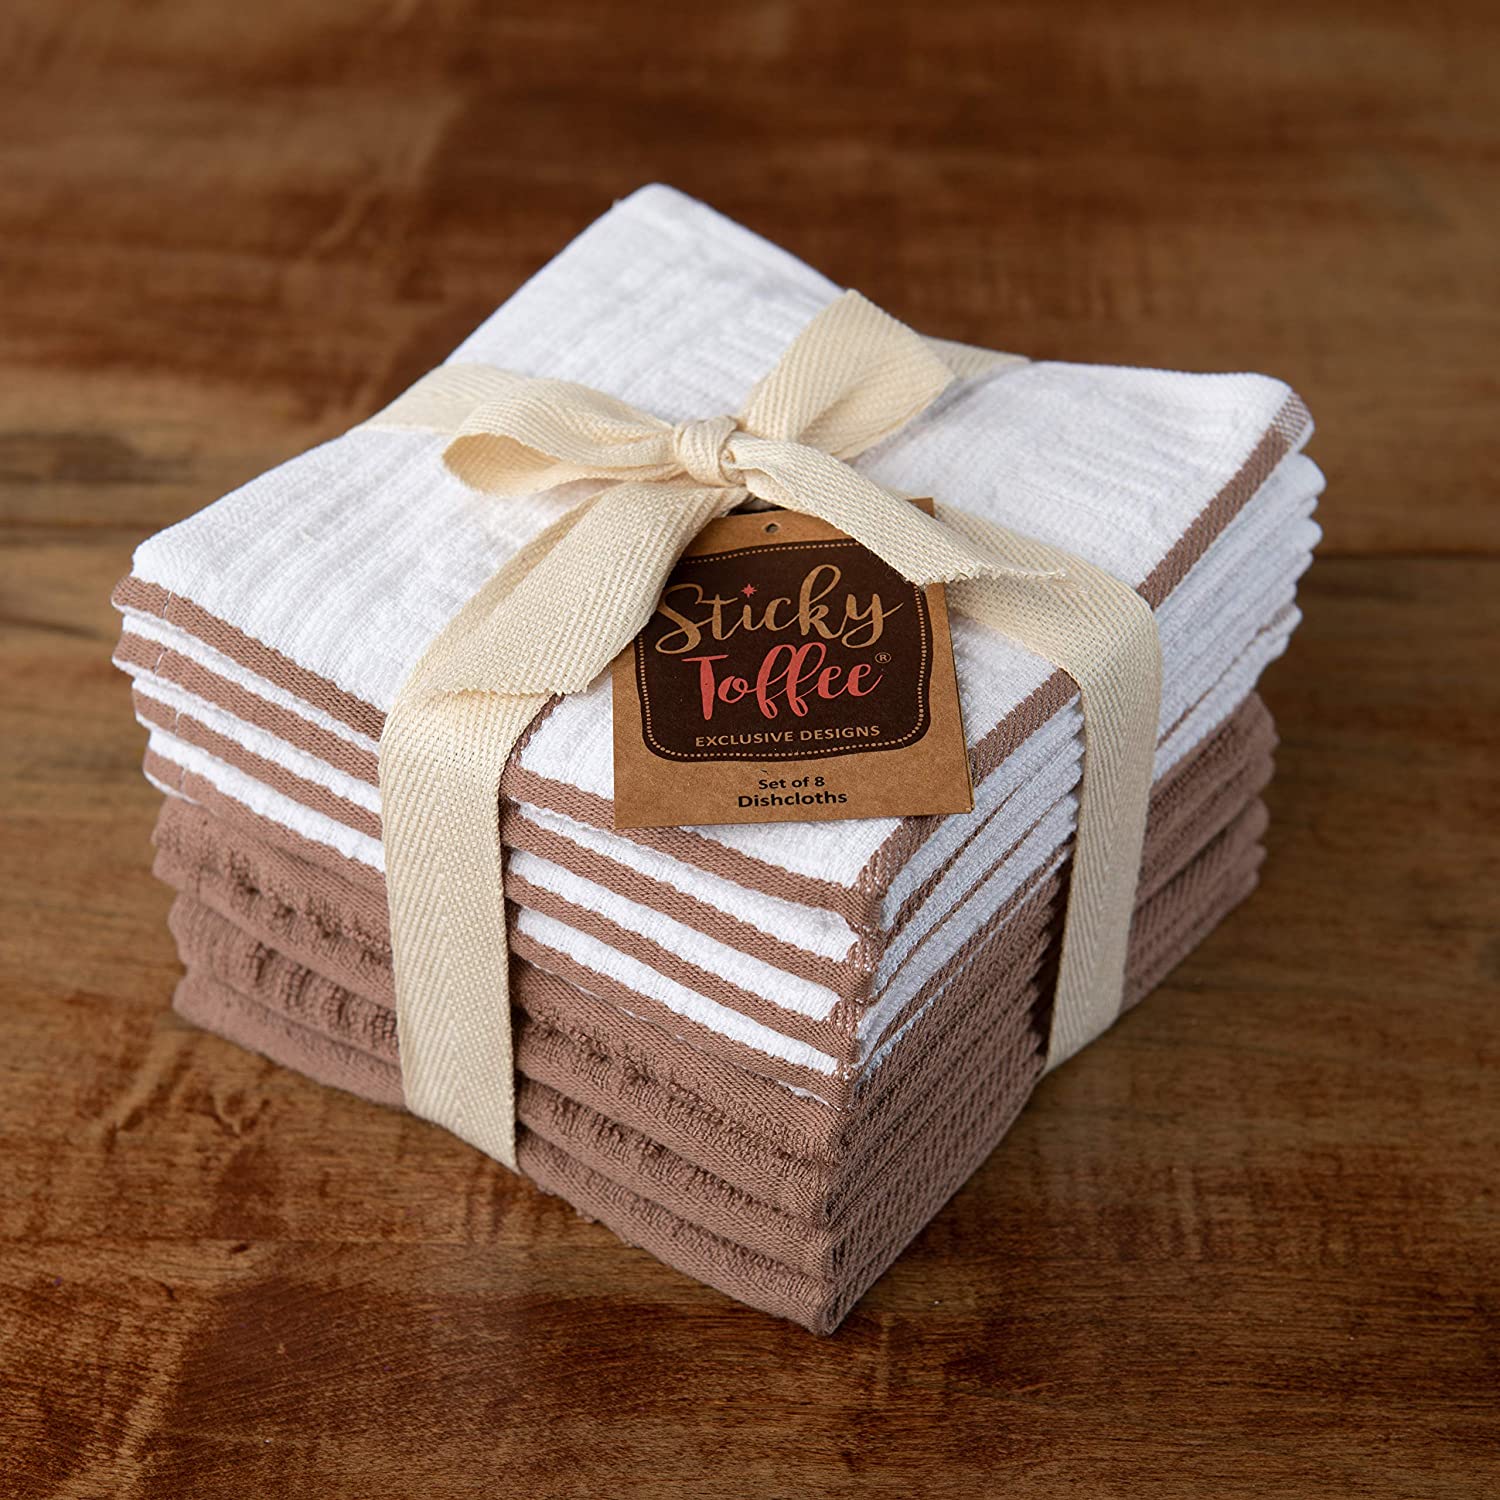 Sticky Toffee Kitchen Dishcloths Towels 100% Cotton, Set of 8